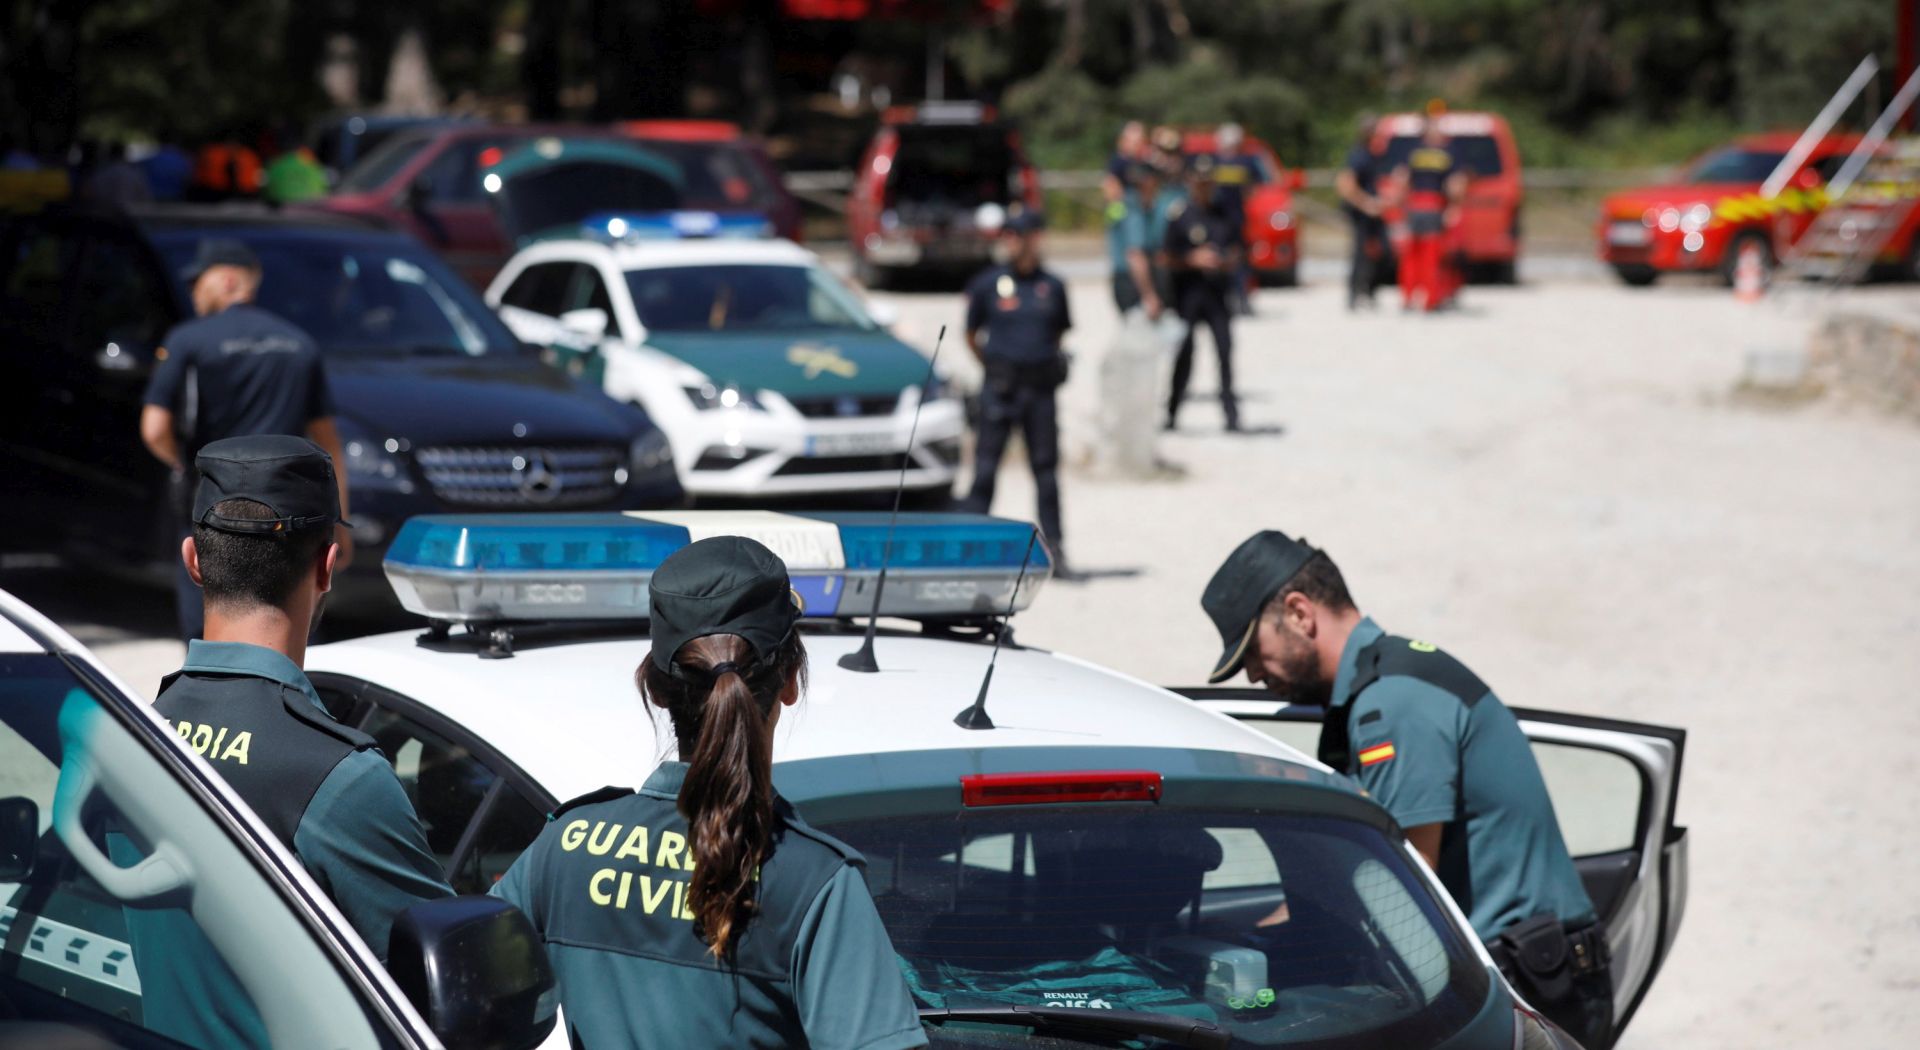 epa07816790 panish Civil Guards in Cercedilla, Madrid, Spain, after the body of Spanish Olympic medalist Blanca Fernandez Ochoa was found nearby 04 September 2019. The body of Blanca Fernandez Ochoa was found 04 September 2019, in the mountains in La Penota, a mountain peak near Los Molinos days after she went missing 23 August 2019 after leaving her sister's home in Aravaca. Finally her car was found 01 September 2019 in a parking lot in the mountains where the police found her ID card, her driving license and 15 euros.  EPA/David Fernandez